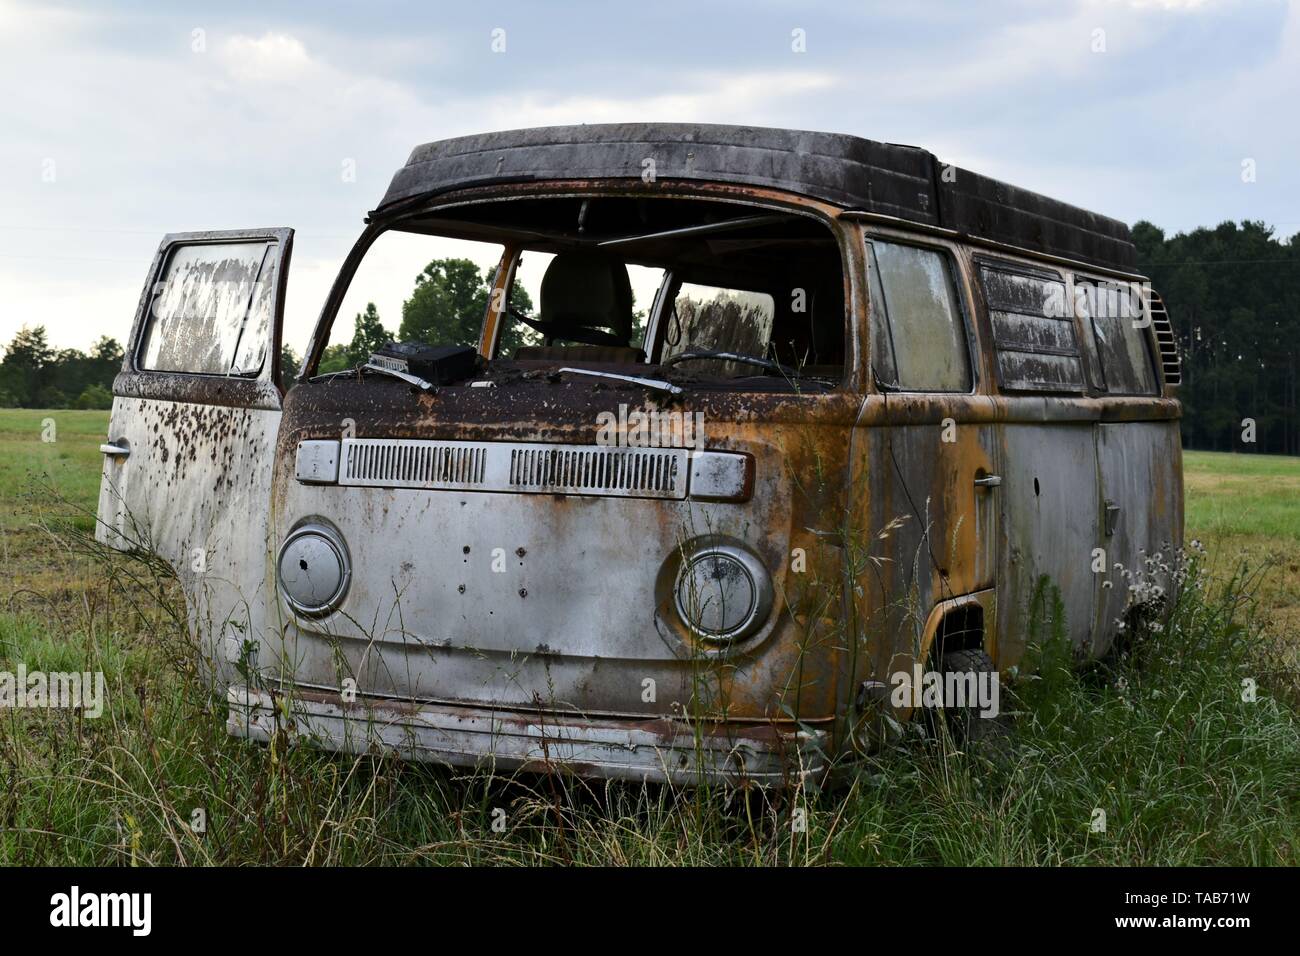 Abandoned 1976 Volkswagen Bus sitting in a field. Stock Photo